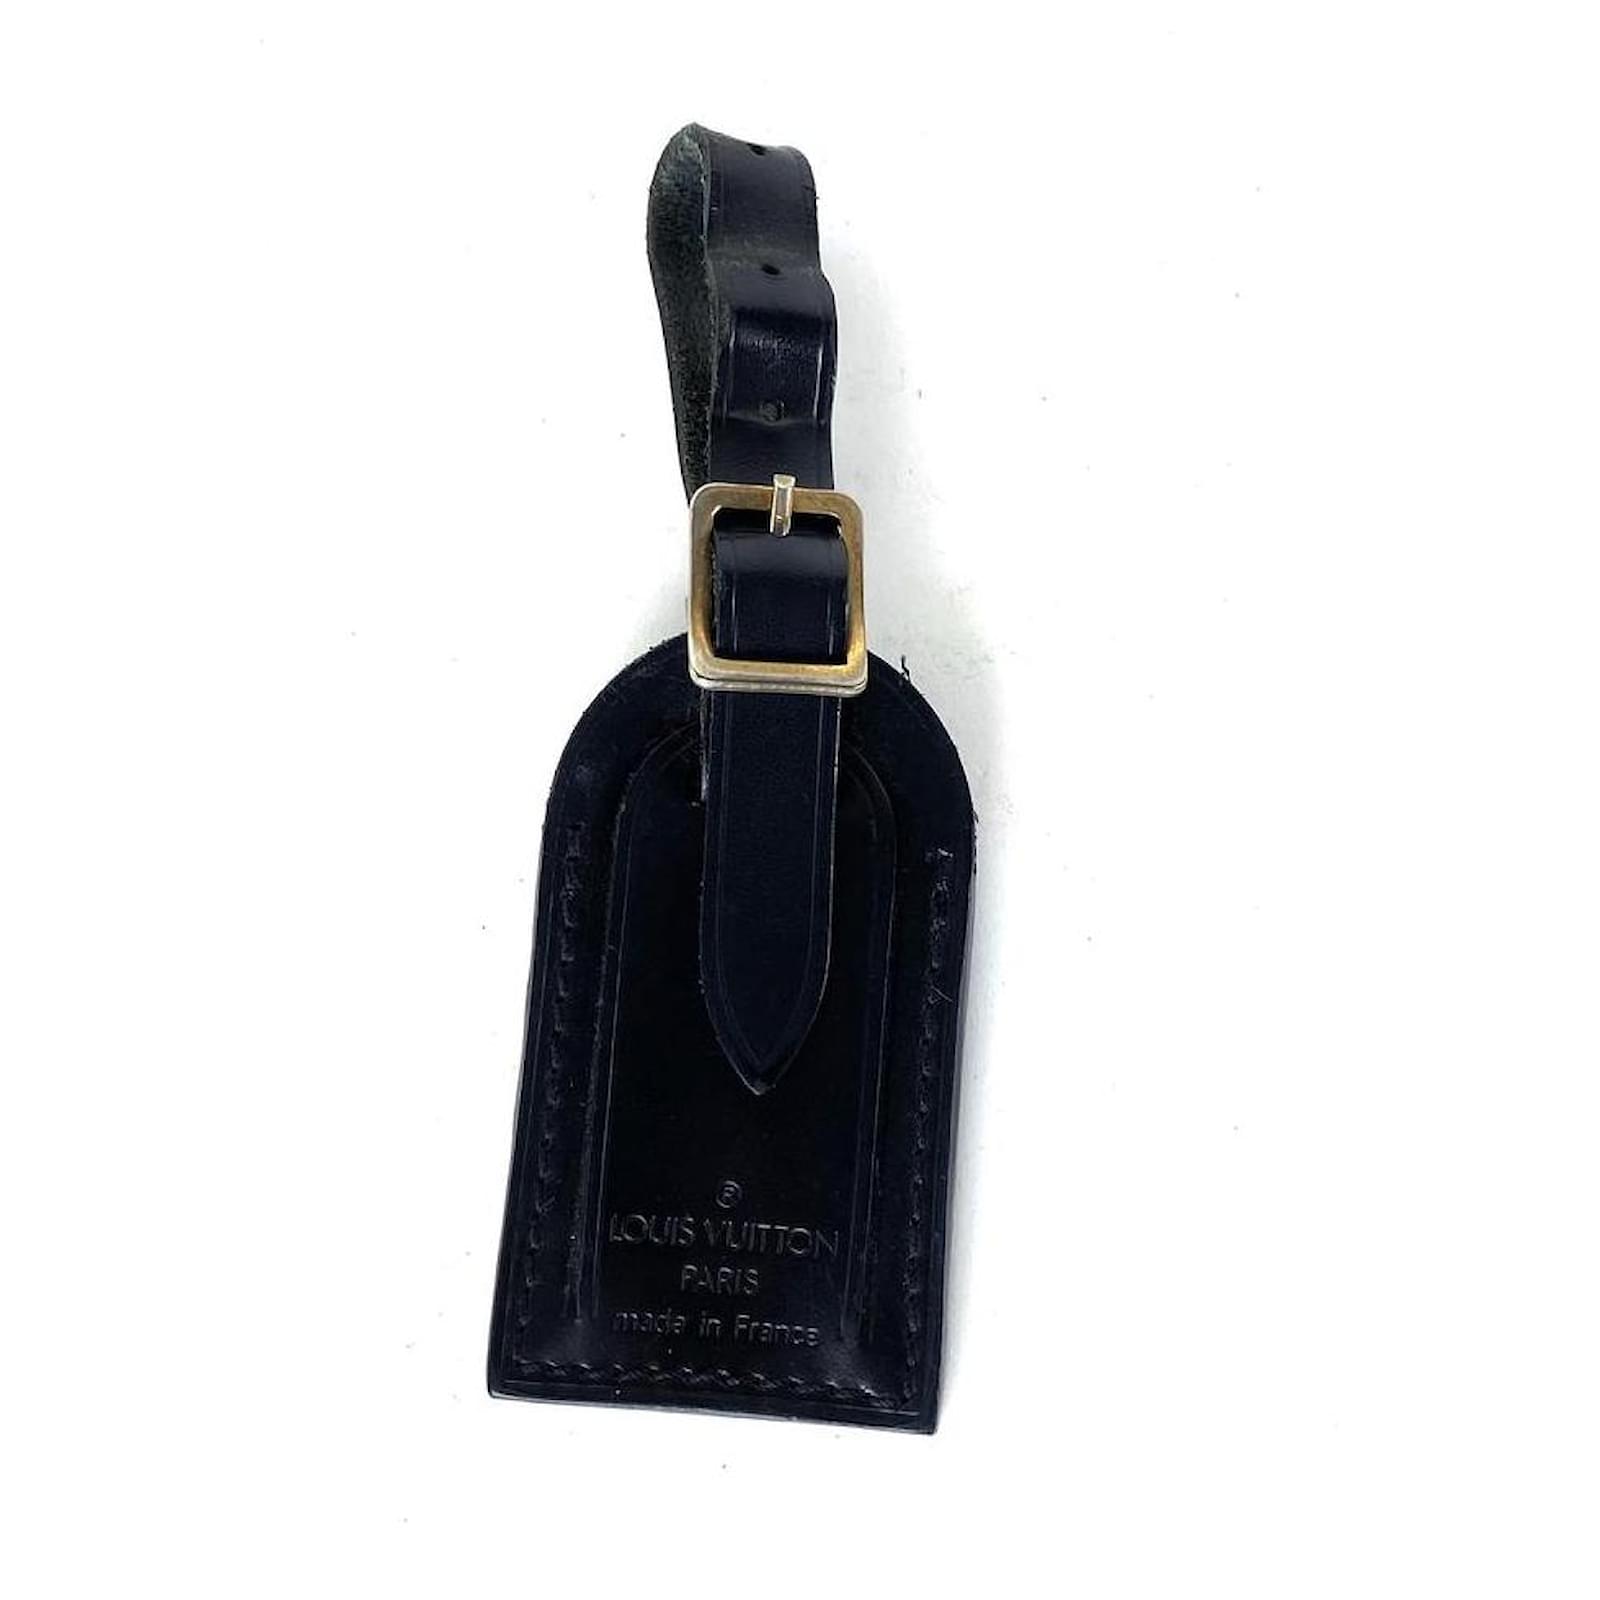 Lv Luggage Tag Good Condition